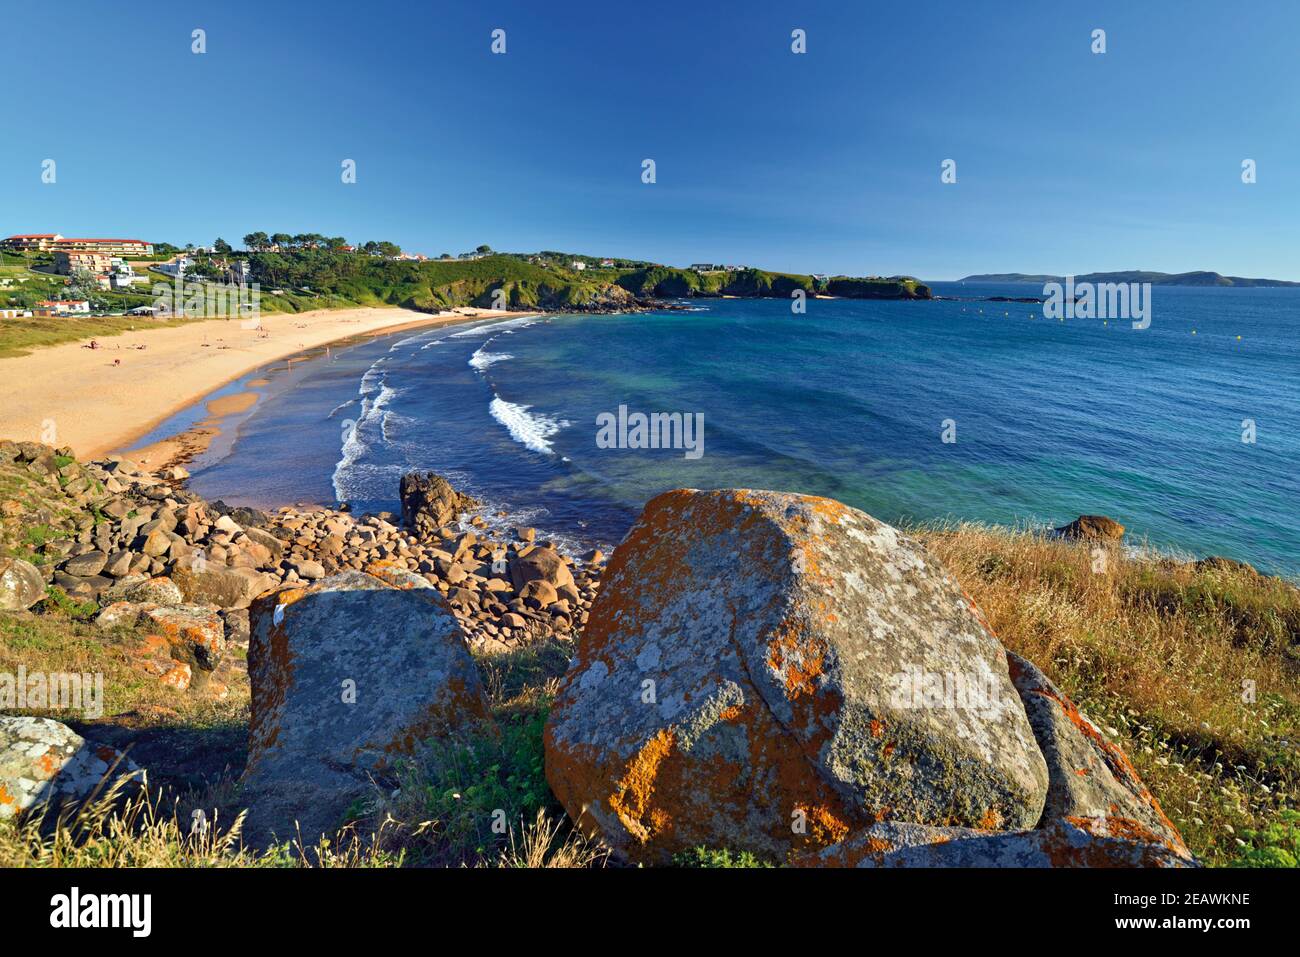 Beach view with long sand beach, rocks and blue ocean Stock Photo